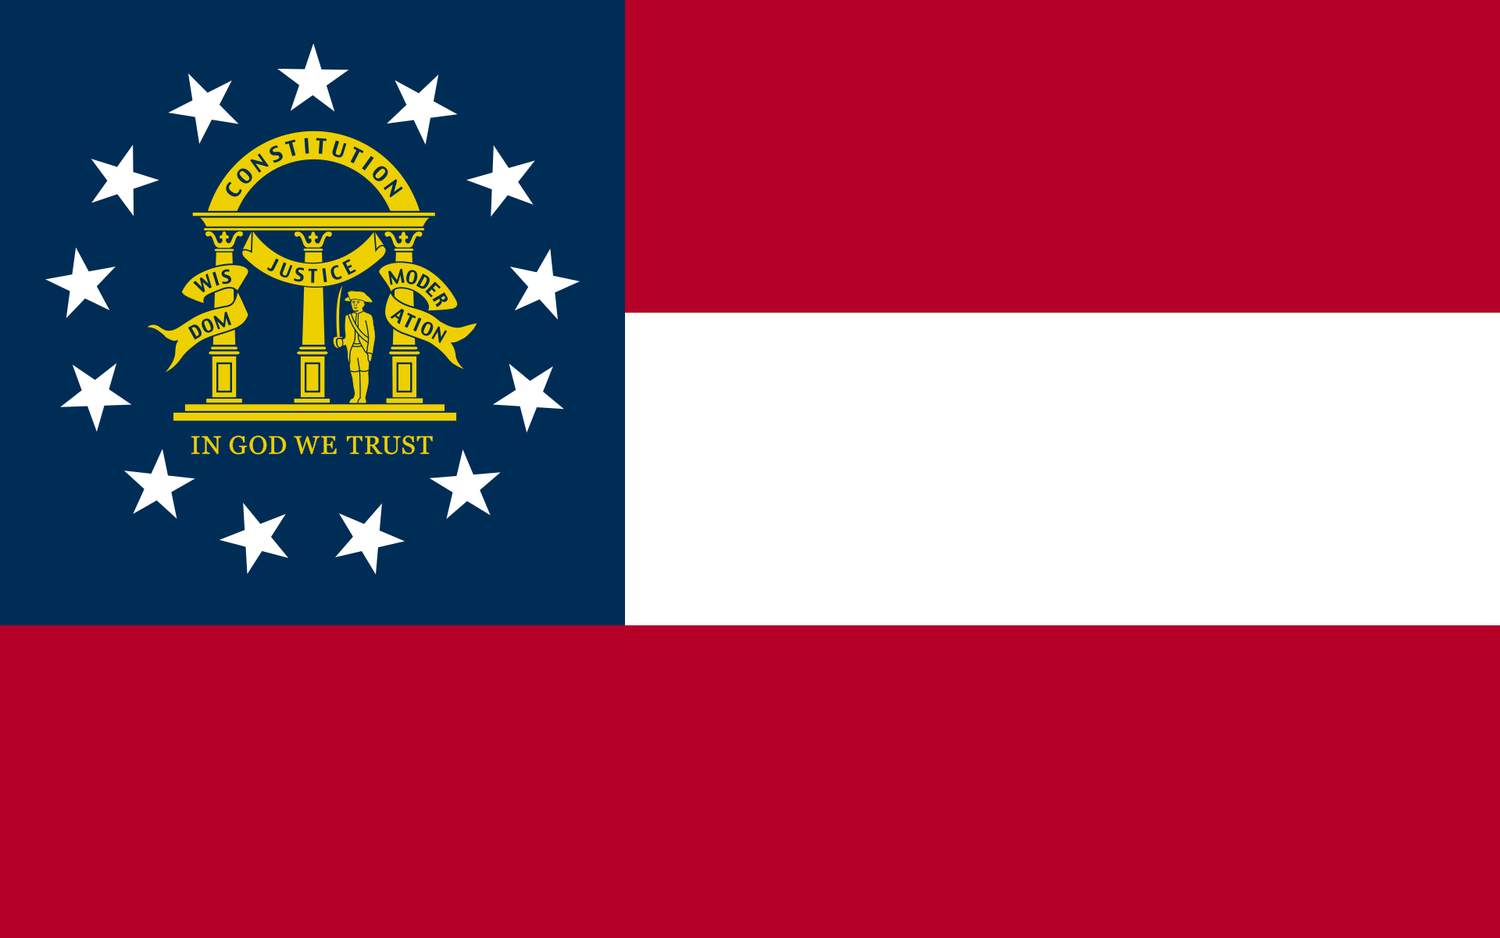 The official state flag of Georgia was adopted in 2003 and features a red saltire on a white background - History By Mail